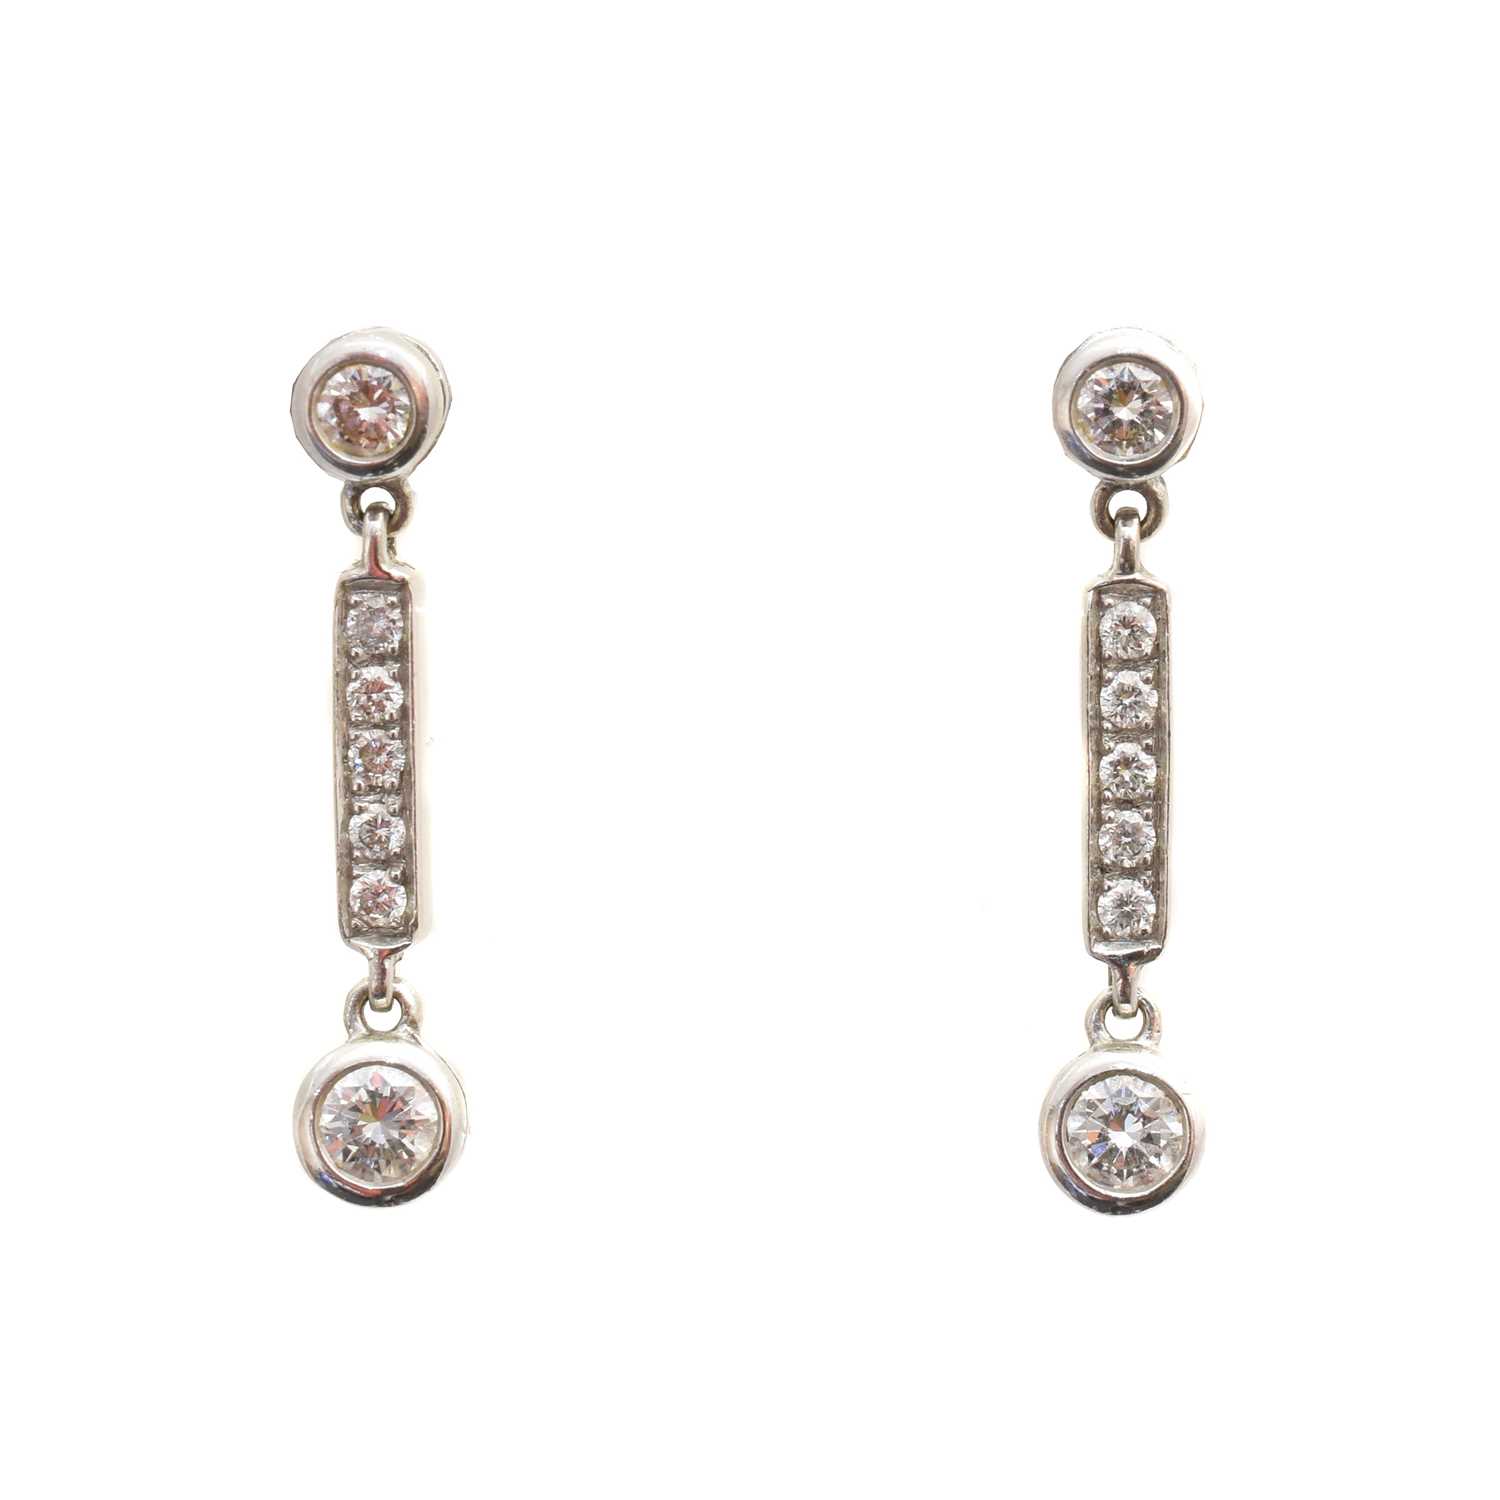 Lot 44 - A pair of 18ct gold diamond earrings